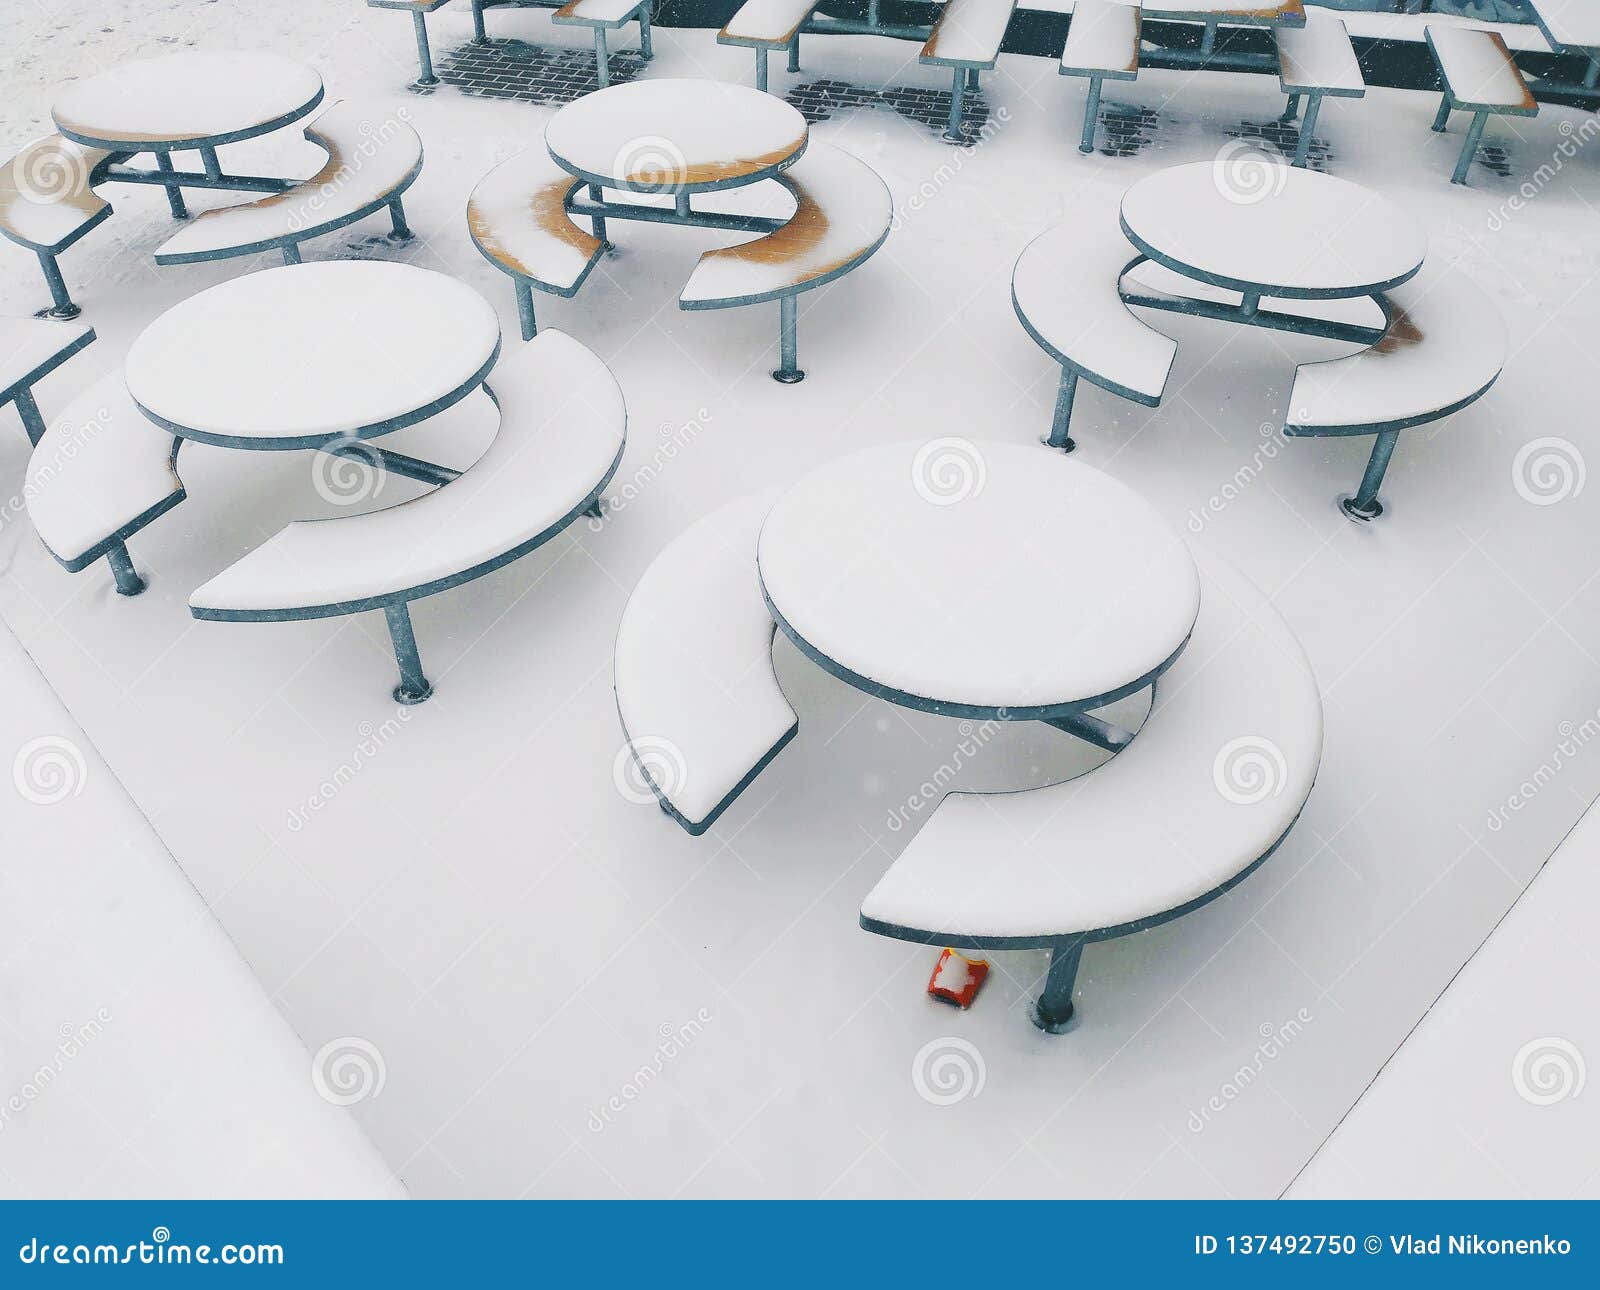 mcdonalds tables in the snow in the city of kiev